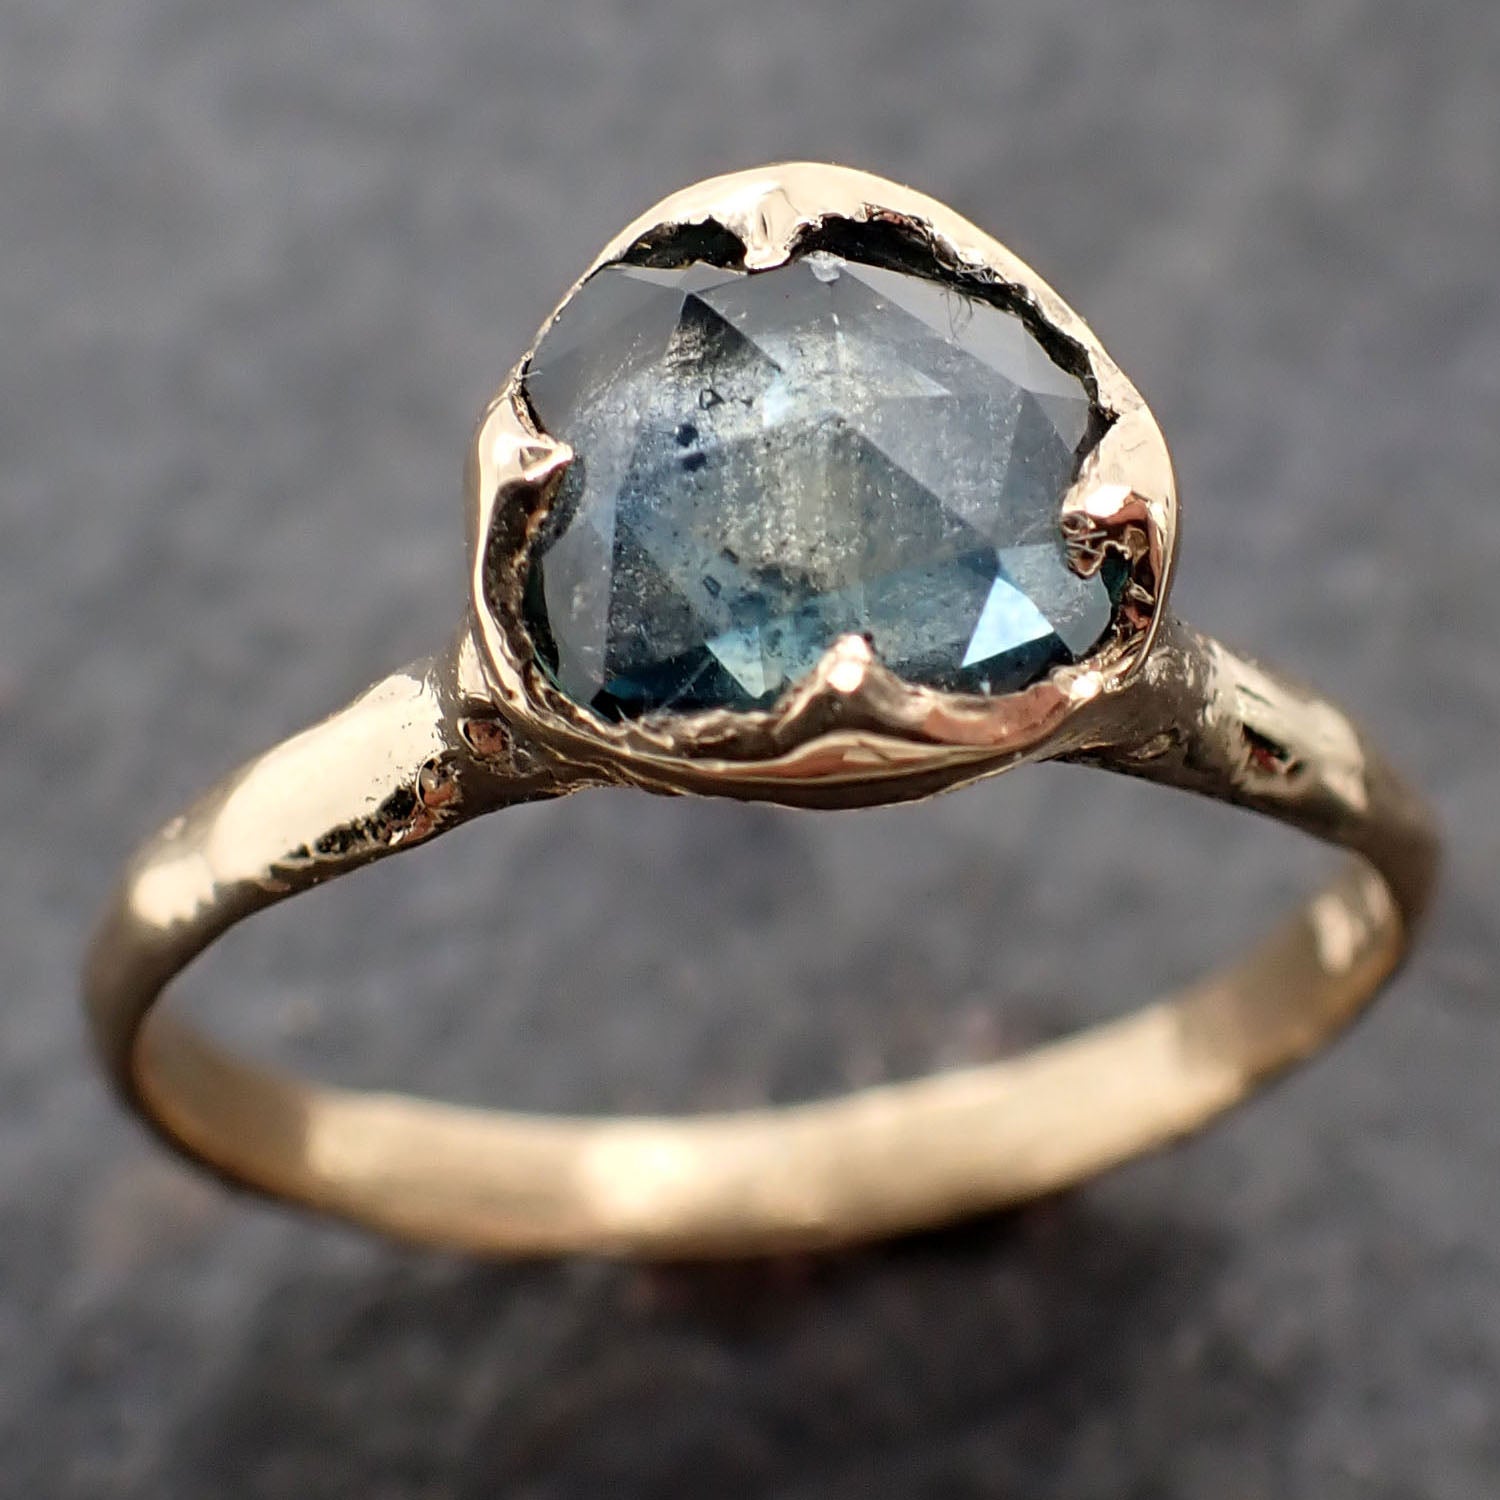 Fancy cut Montana blue Sapphire 18k Yellow gold Solitaire Ring Gold Gemstone Engagement Ring 2614